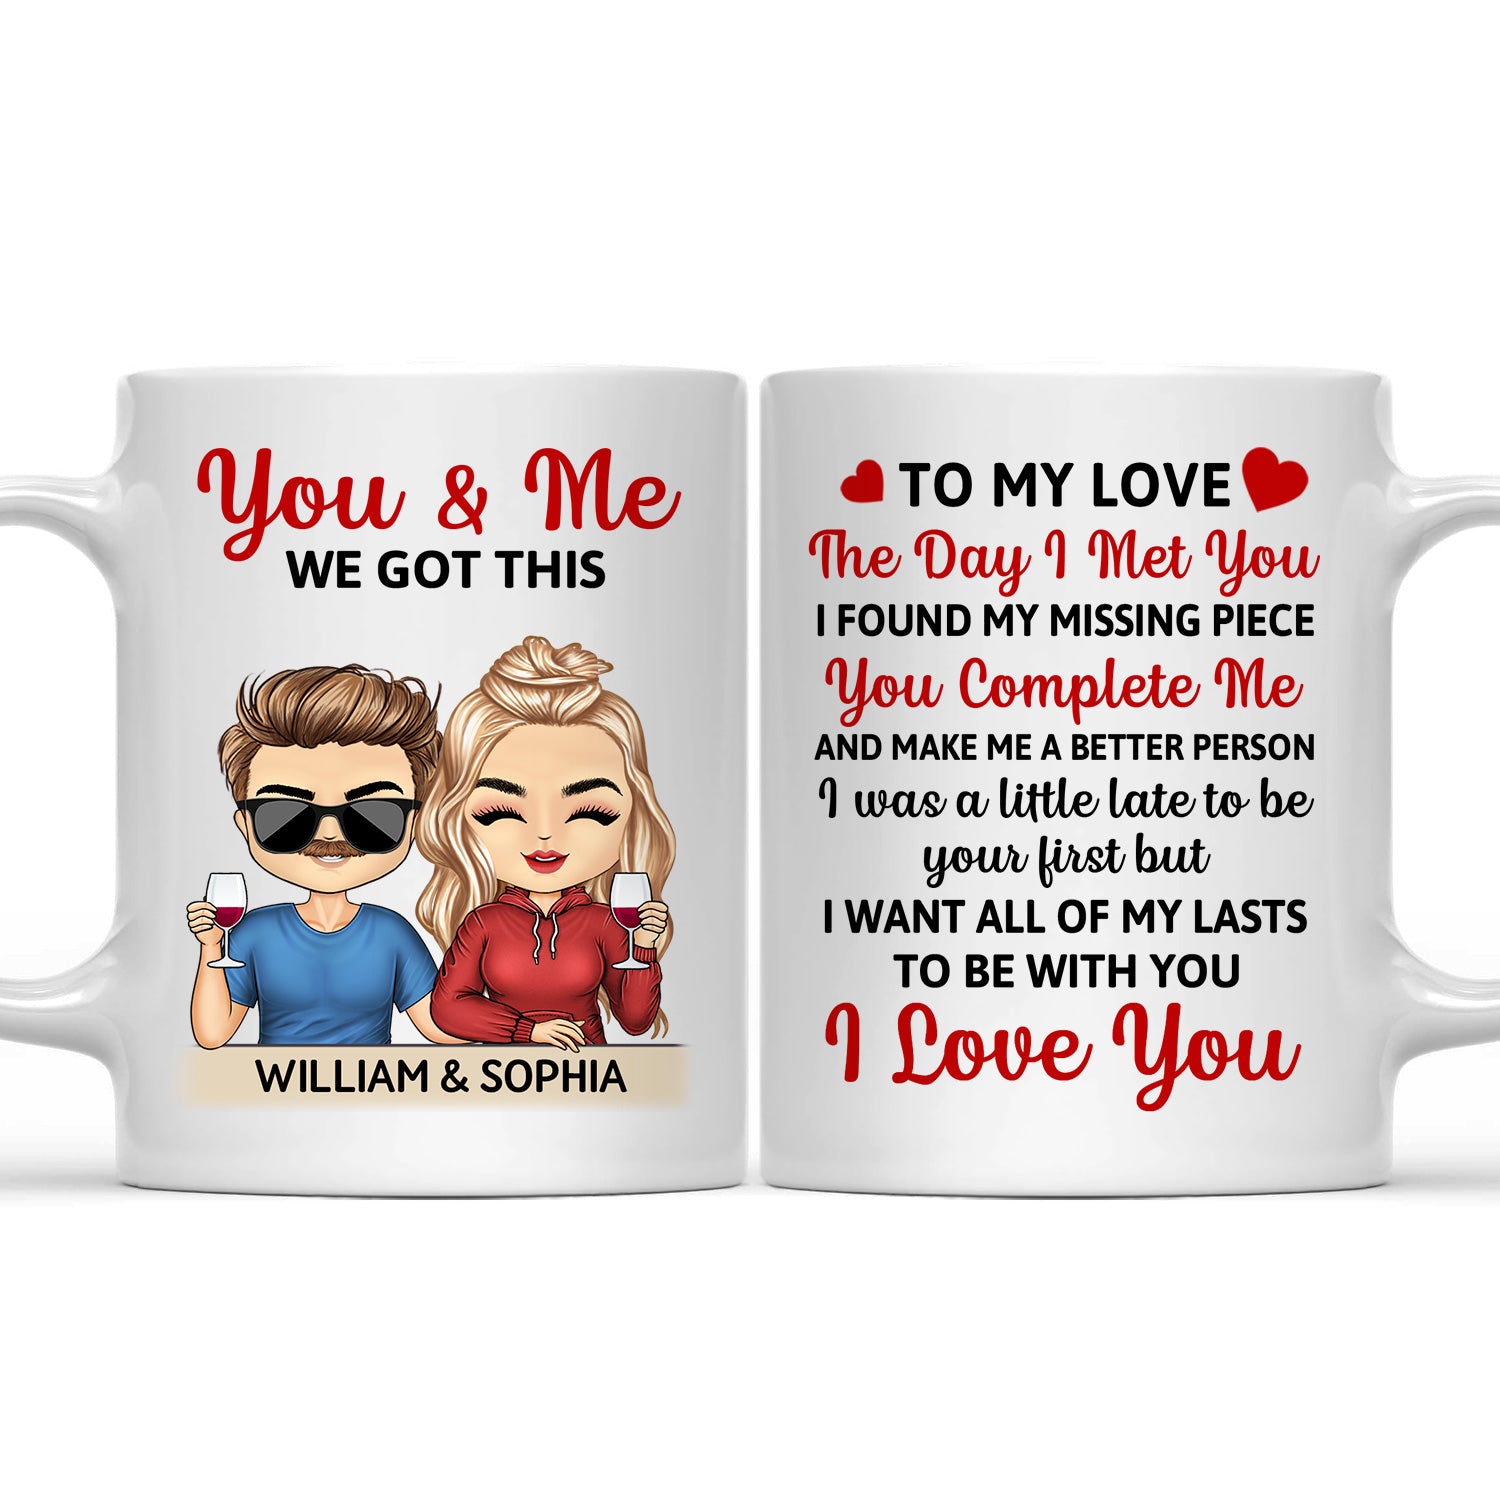 The Day I Met You - Anniversary, Loving Gifts For Couples, Husband, Wife - Personalized Mug